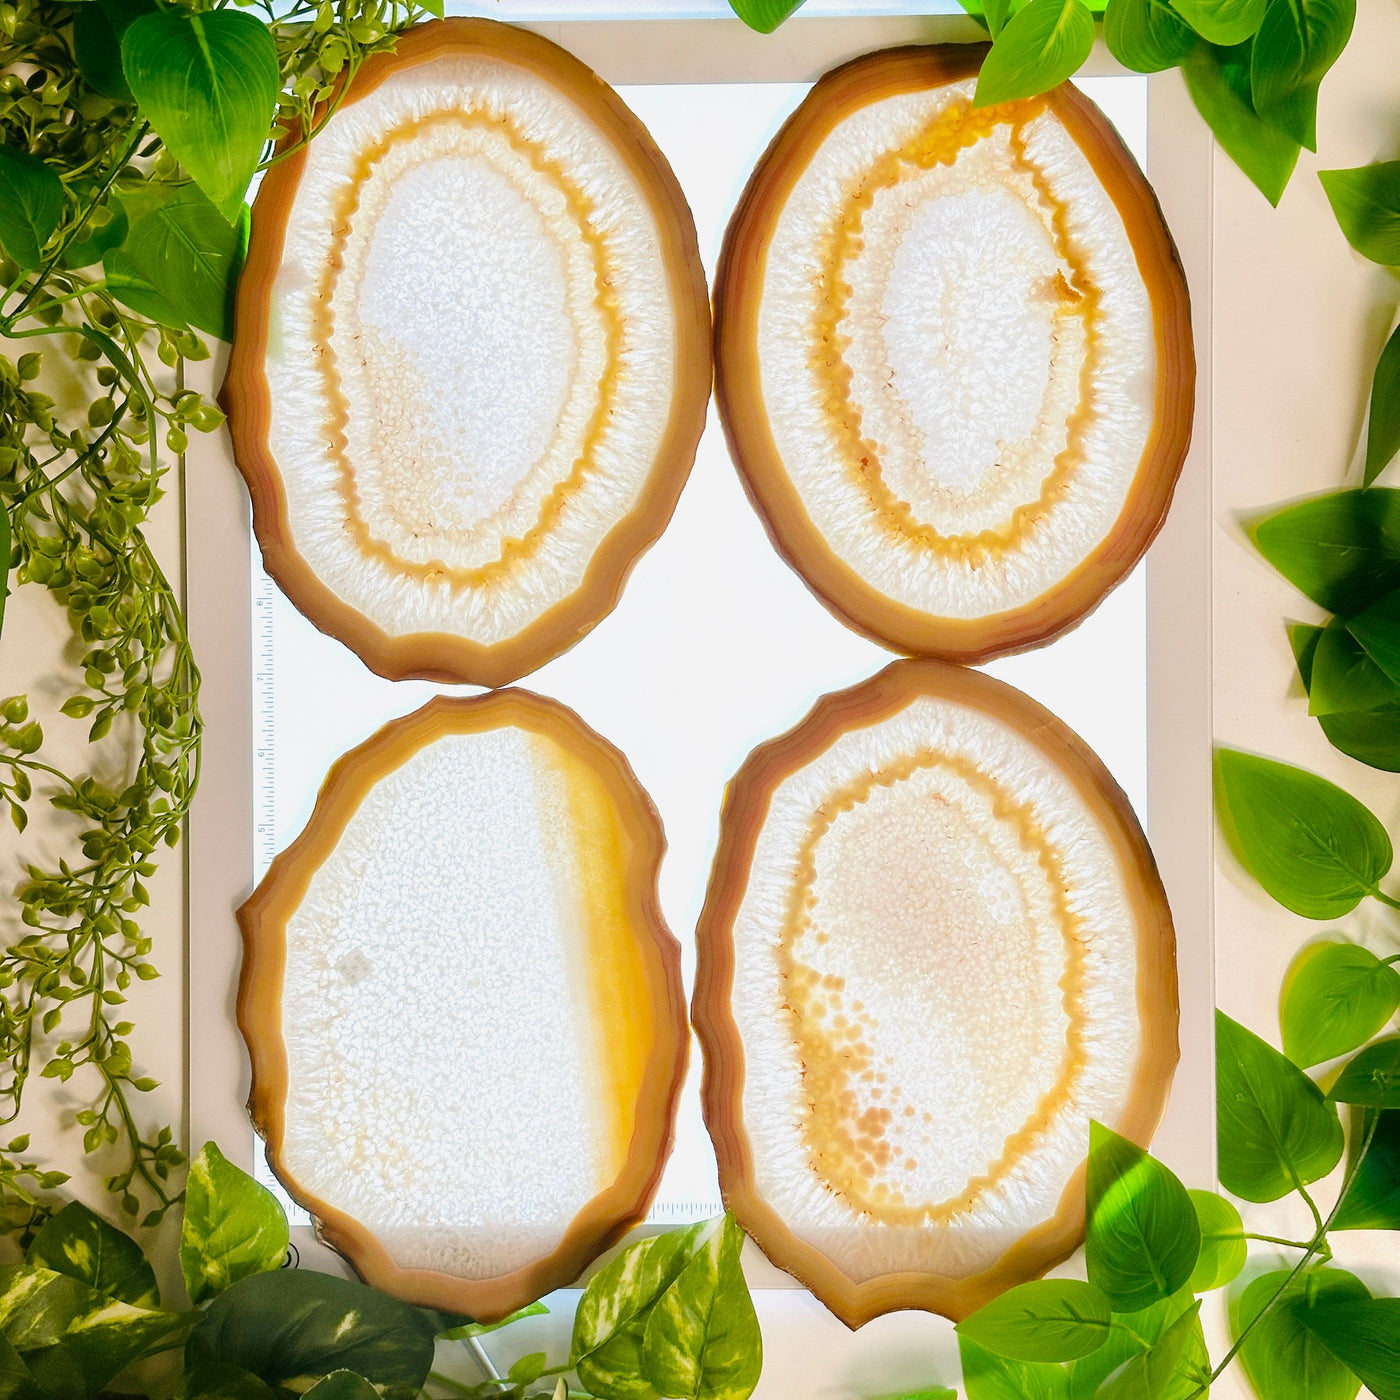 Agate Slice Set - Set of Eight Agate Crystals 4 agate slices on light table surrounded by plants